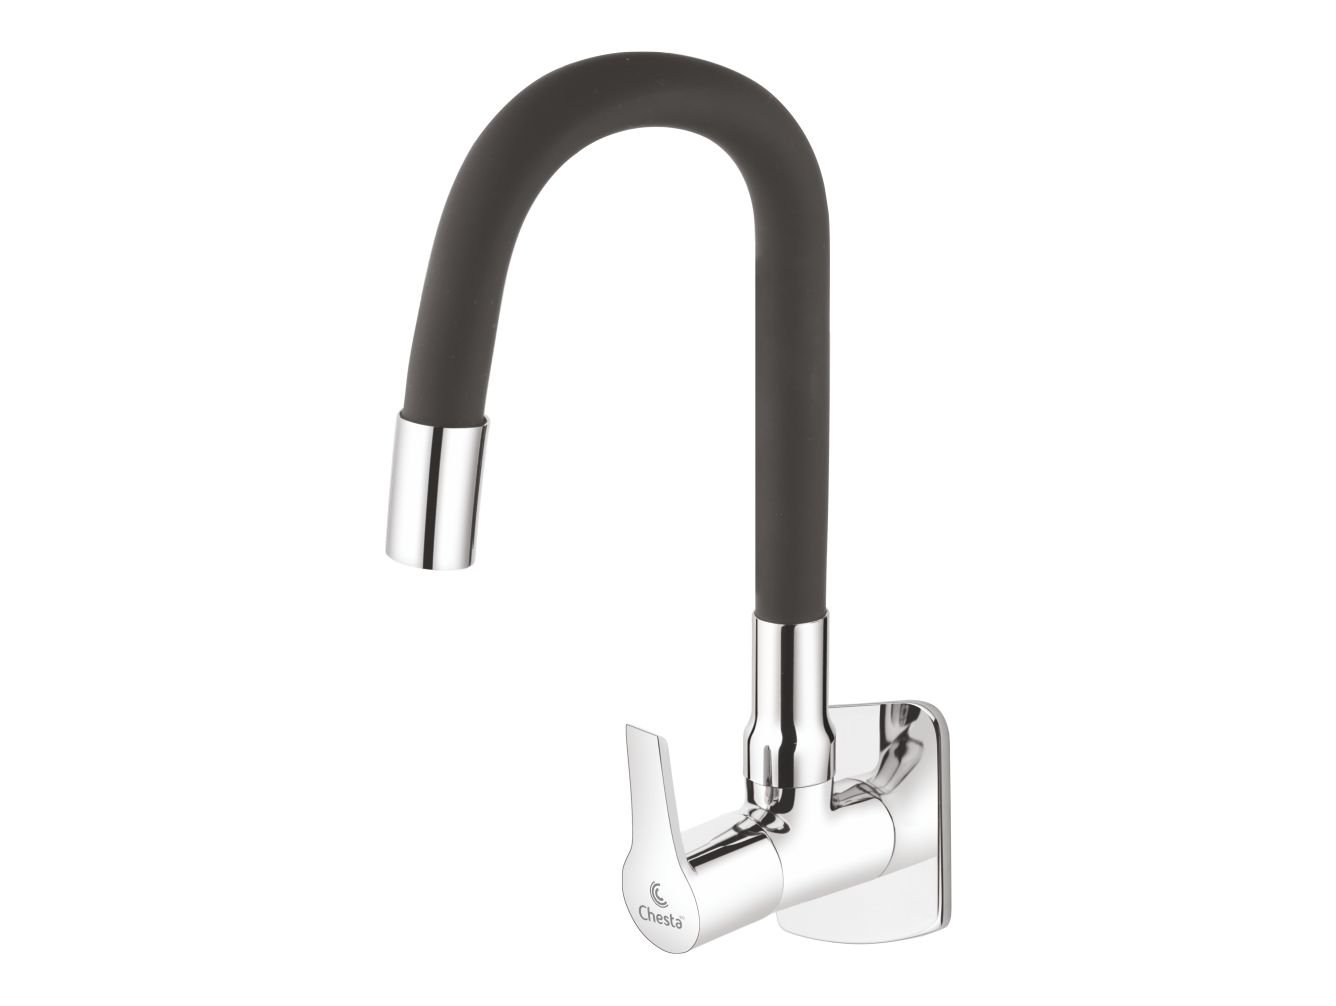 Flexible Sink Cock with Wall Flange by Chesta Bath